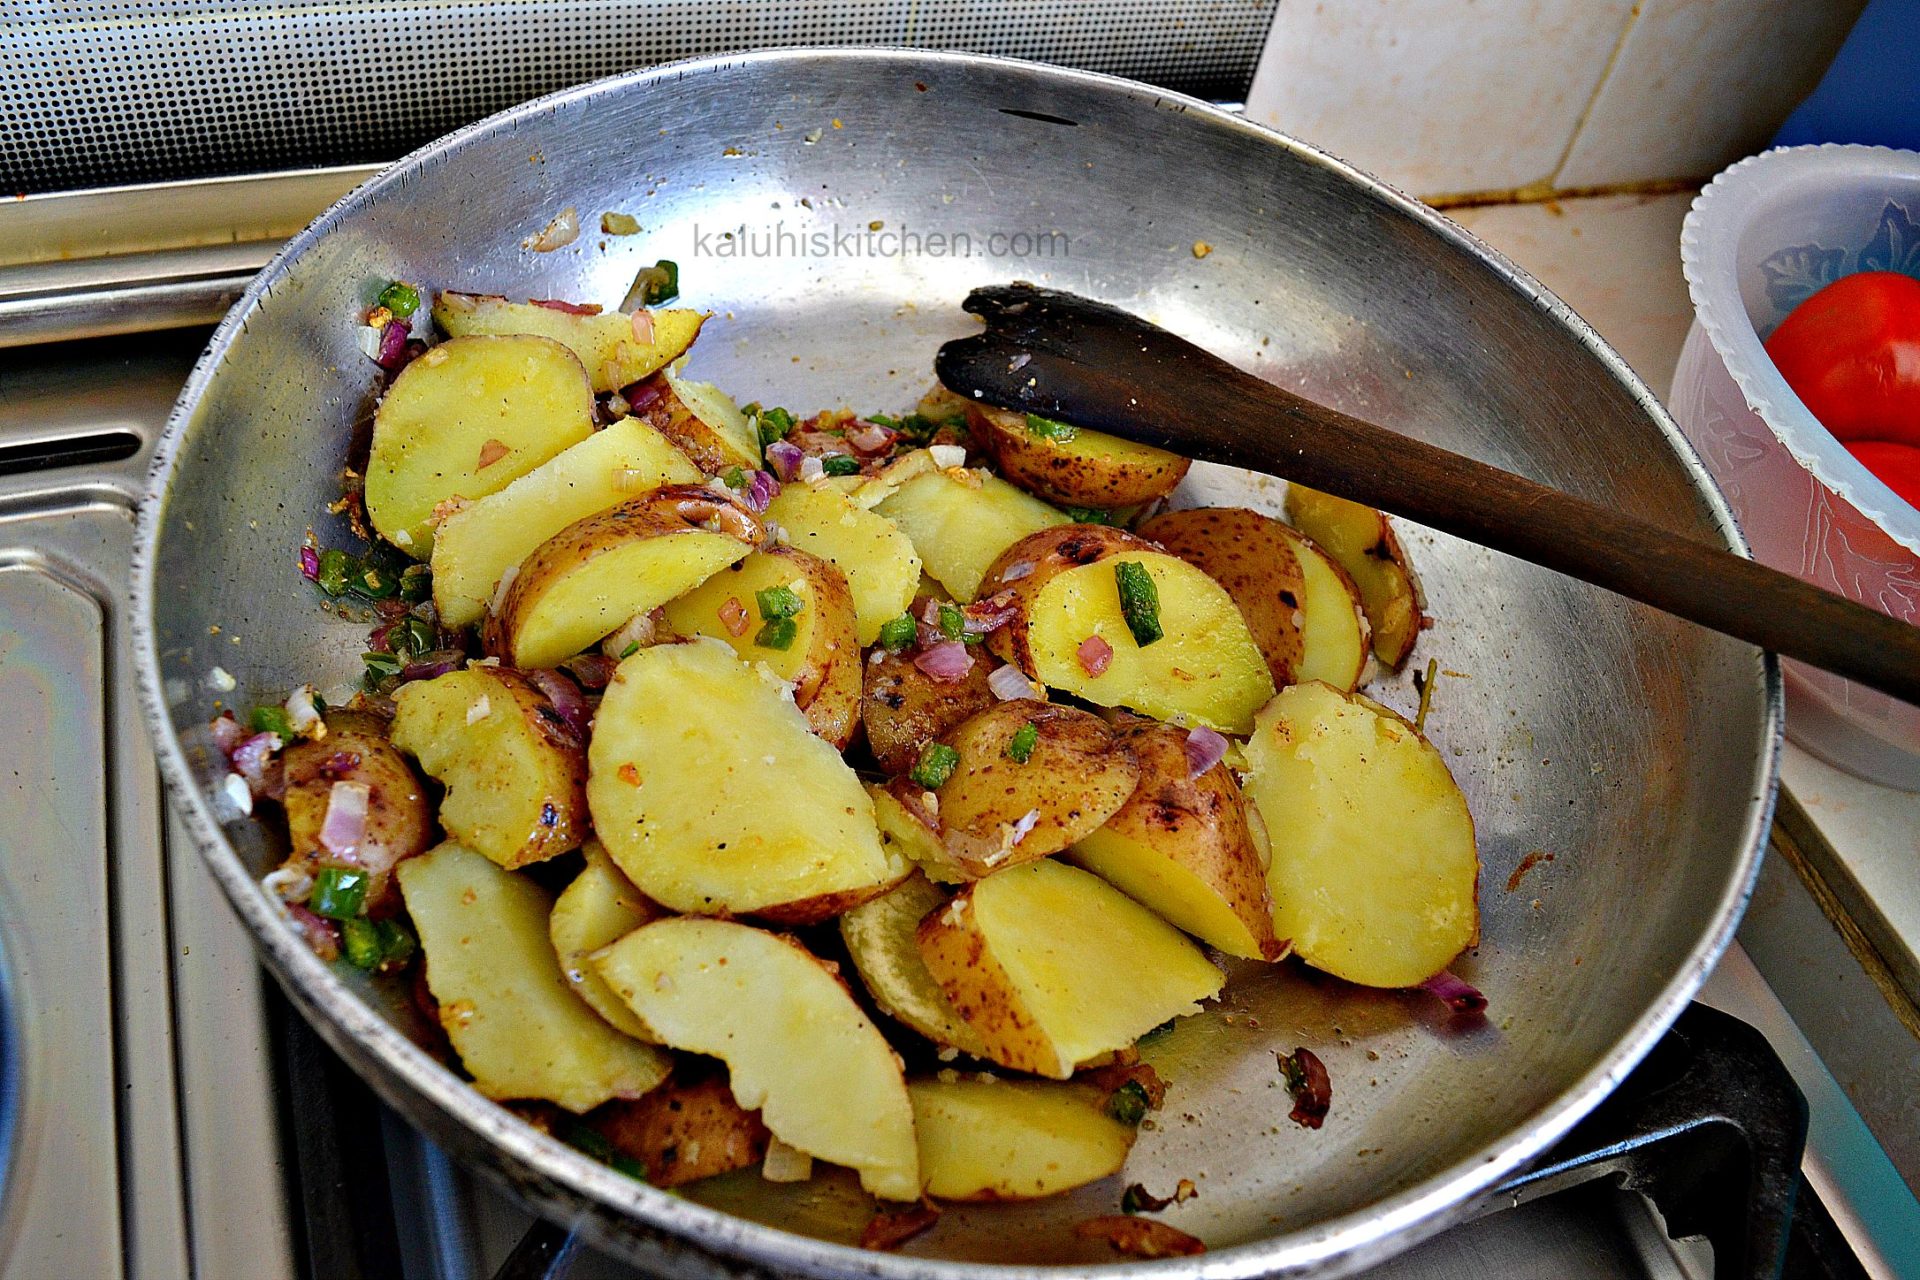 tossing the potatoes in the sauteed vegetables allow everything to mix well without them getting smashed up in the process_kaluhiskitchen.com